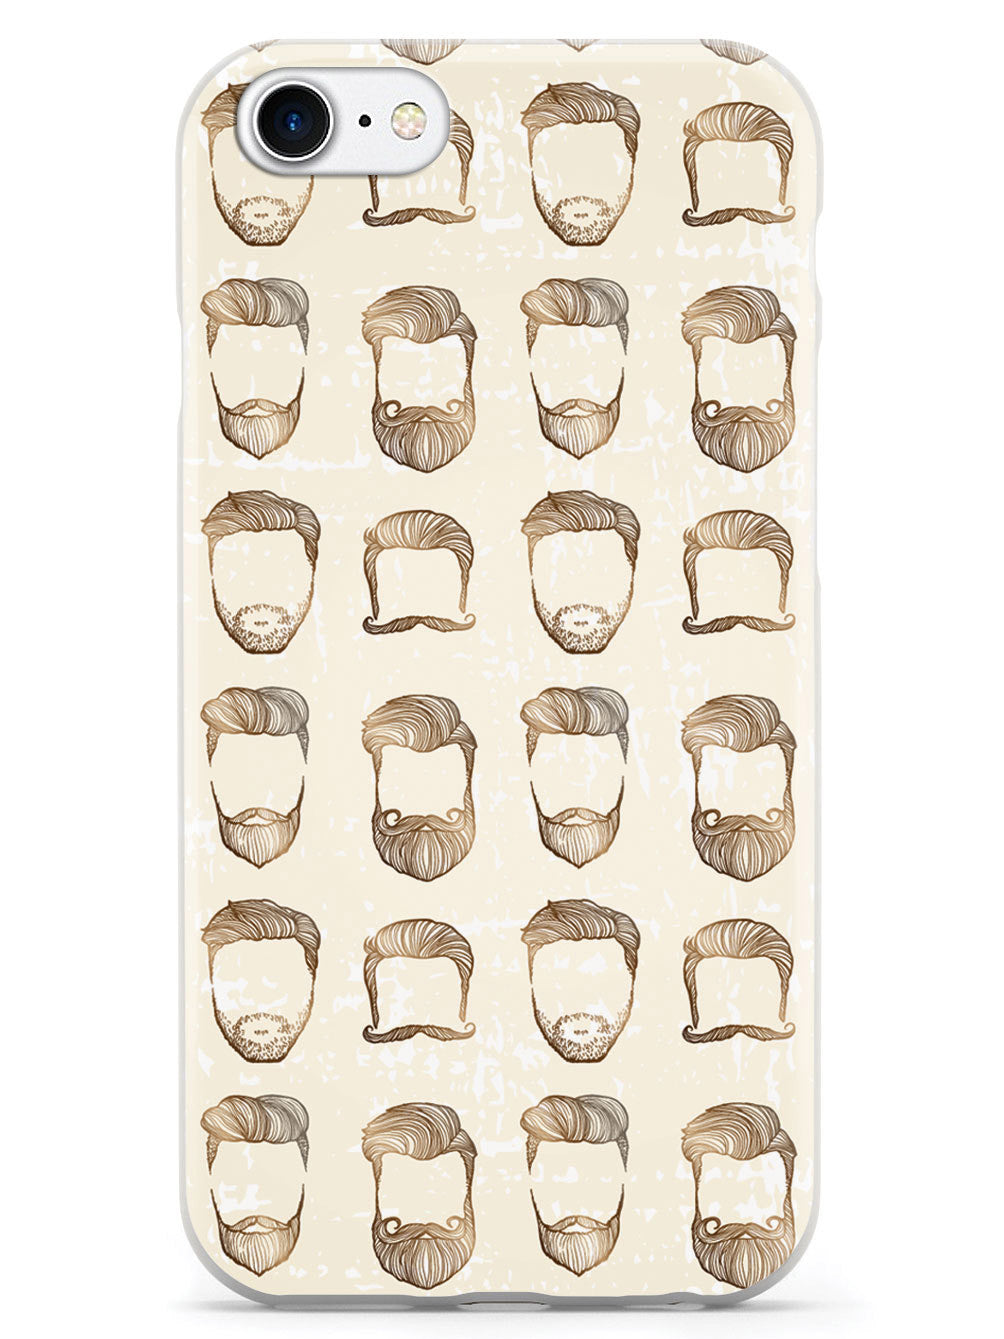 Men's Hairstyles, Magnificent Beards - Vintage Case